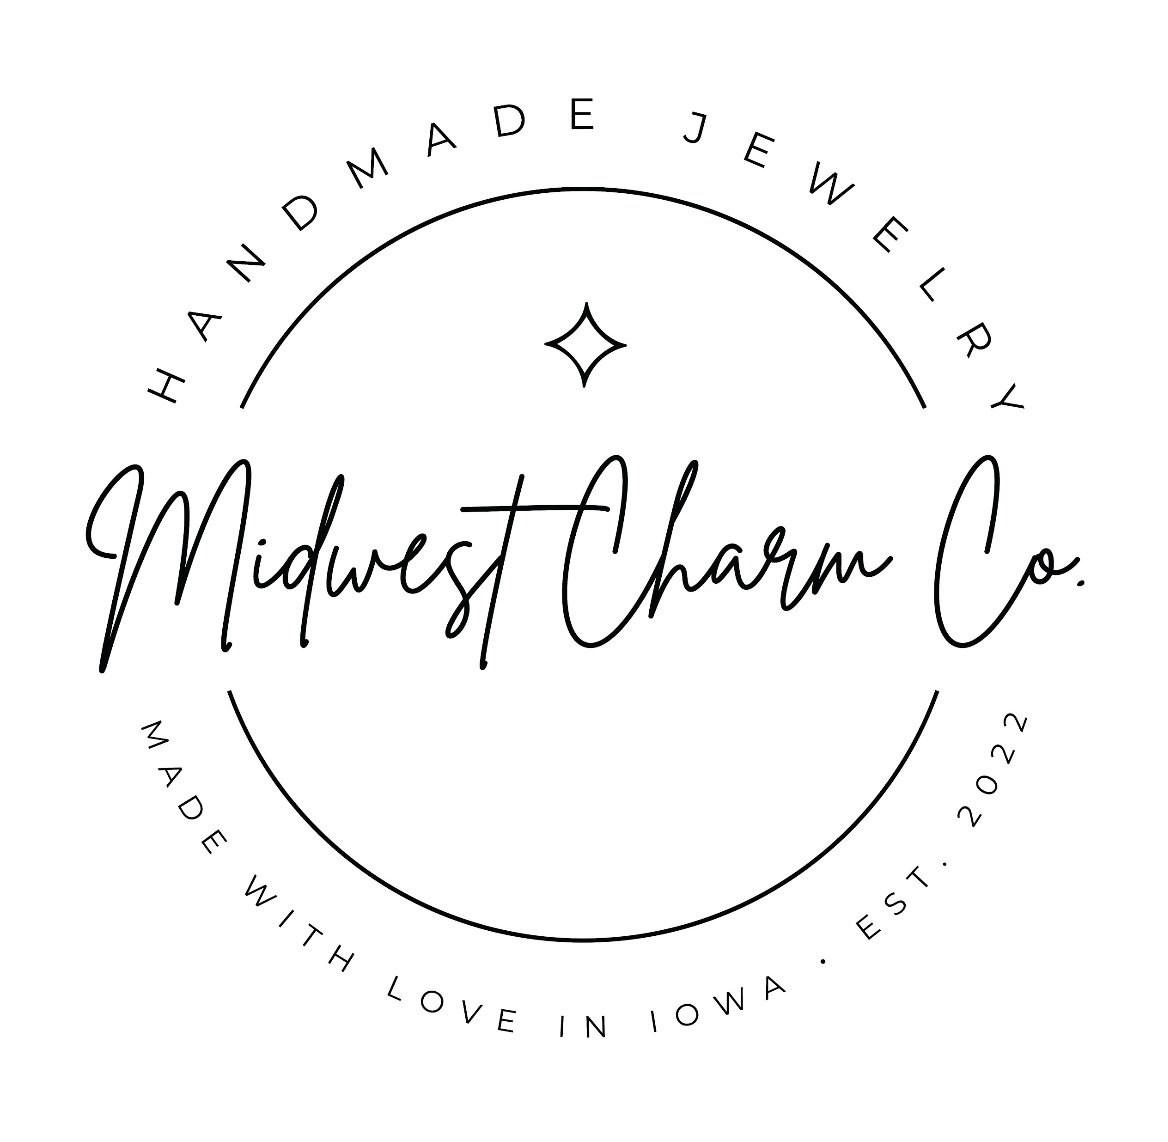 Midwest Charm Co